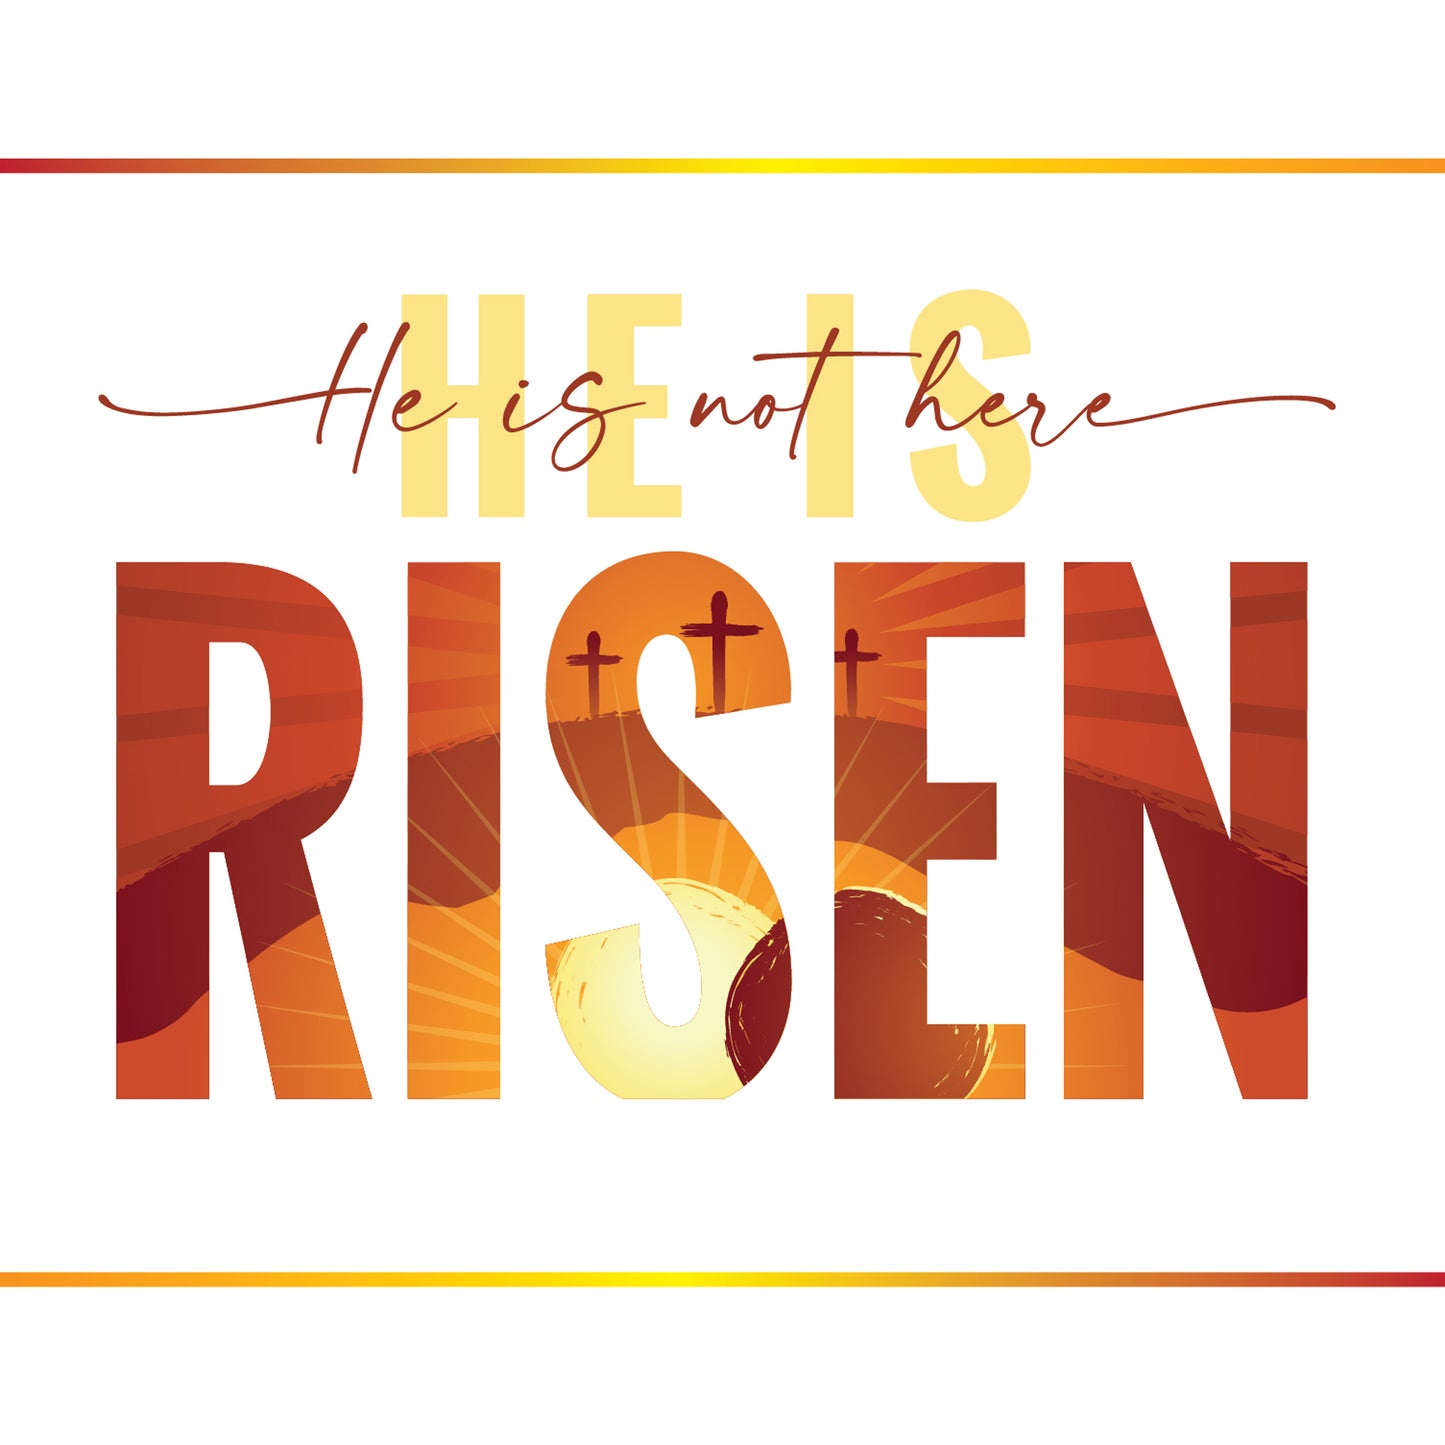 Risen Easter Cards (pack of 5) - The Christian Gift Company